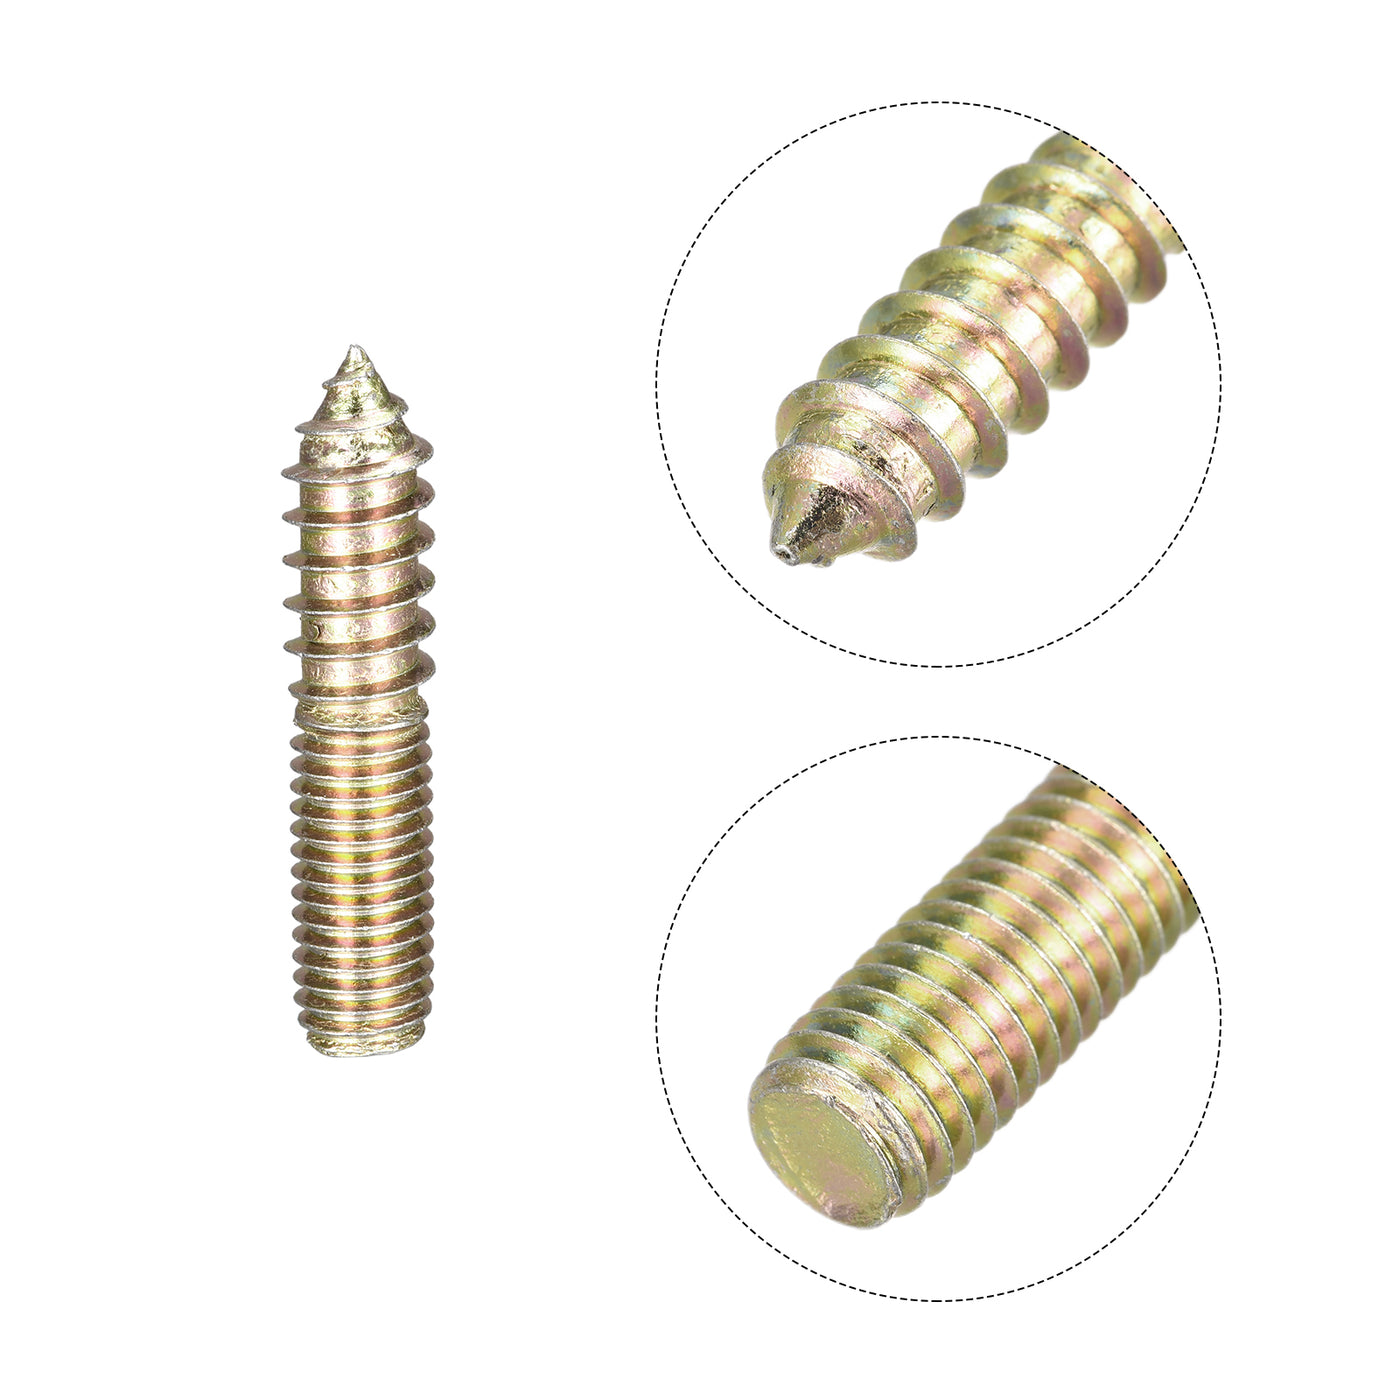 Uxcell Uxcell M10x50mm Hanger Bolts, 12pcs Double Ended Thread Dowel Screws for Wood Furniture